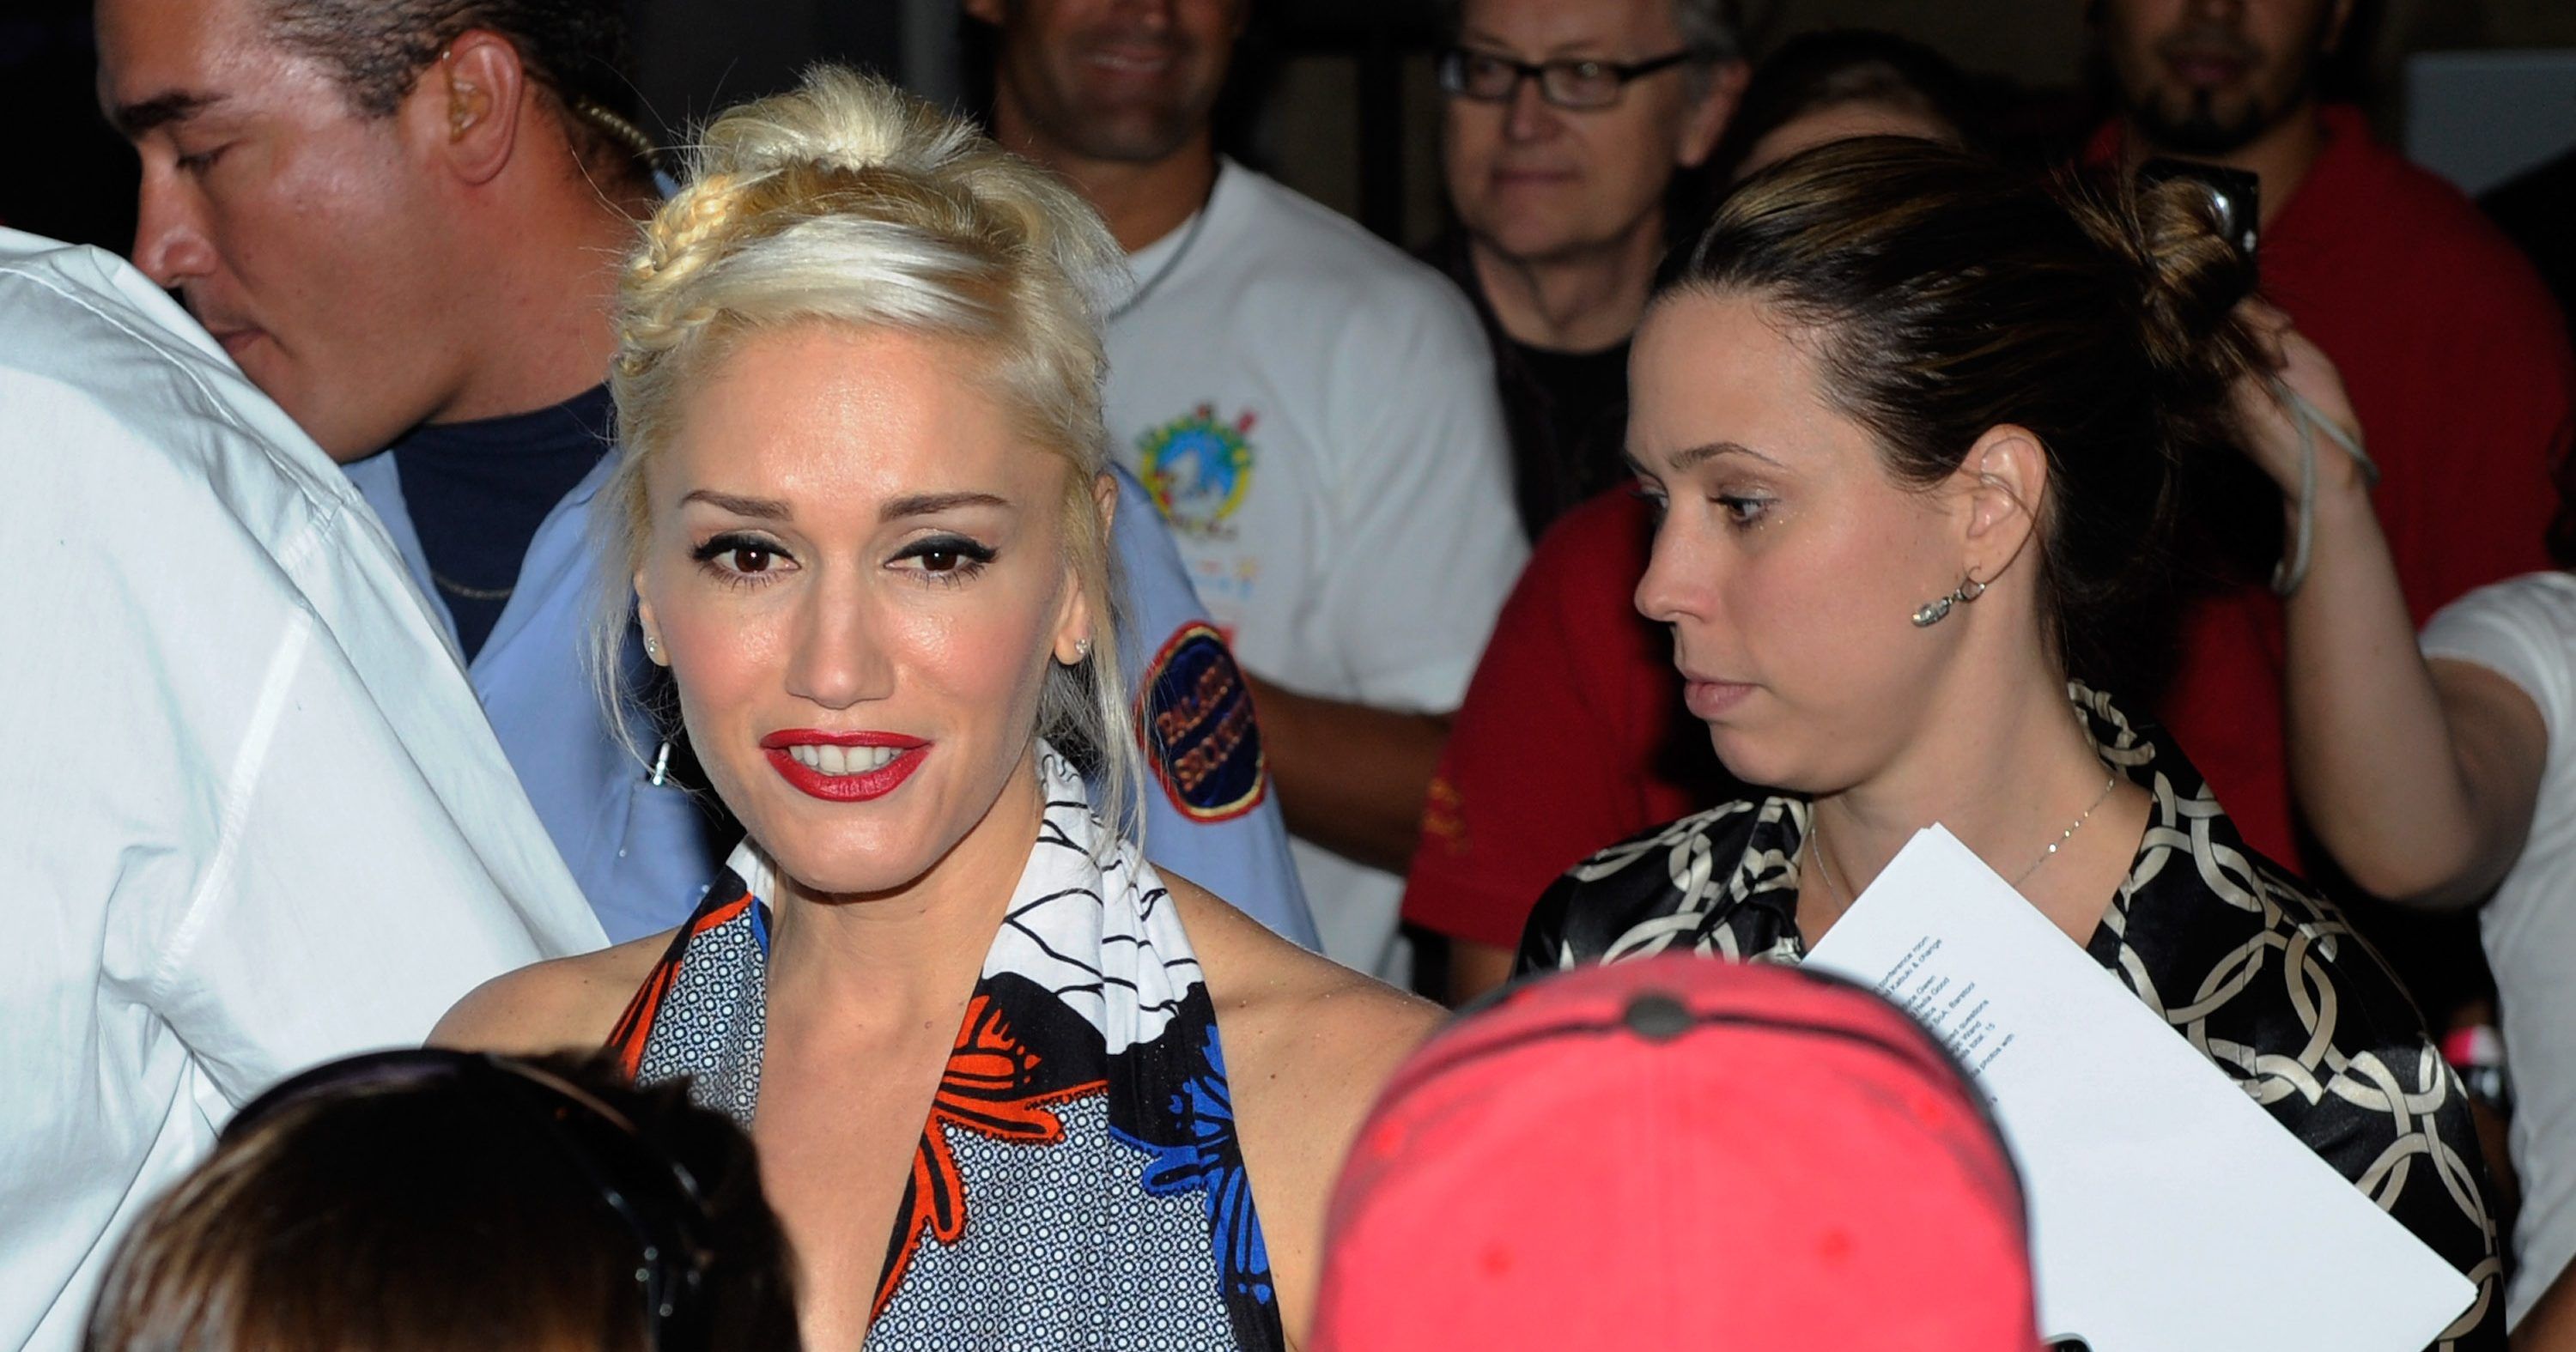 LAS VEGAS - SEPTEMBER 22: Singer Gwen Stefani greets fans after the unveiling of her wax figure at Madame Tussauds Las Vegas at the Venetian Resort Hotel Casino September 22, 2010 in Las Vegas, Nevada. (Photo by Ethan Miller/Getty Images)